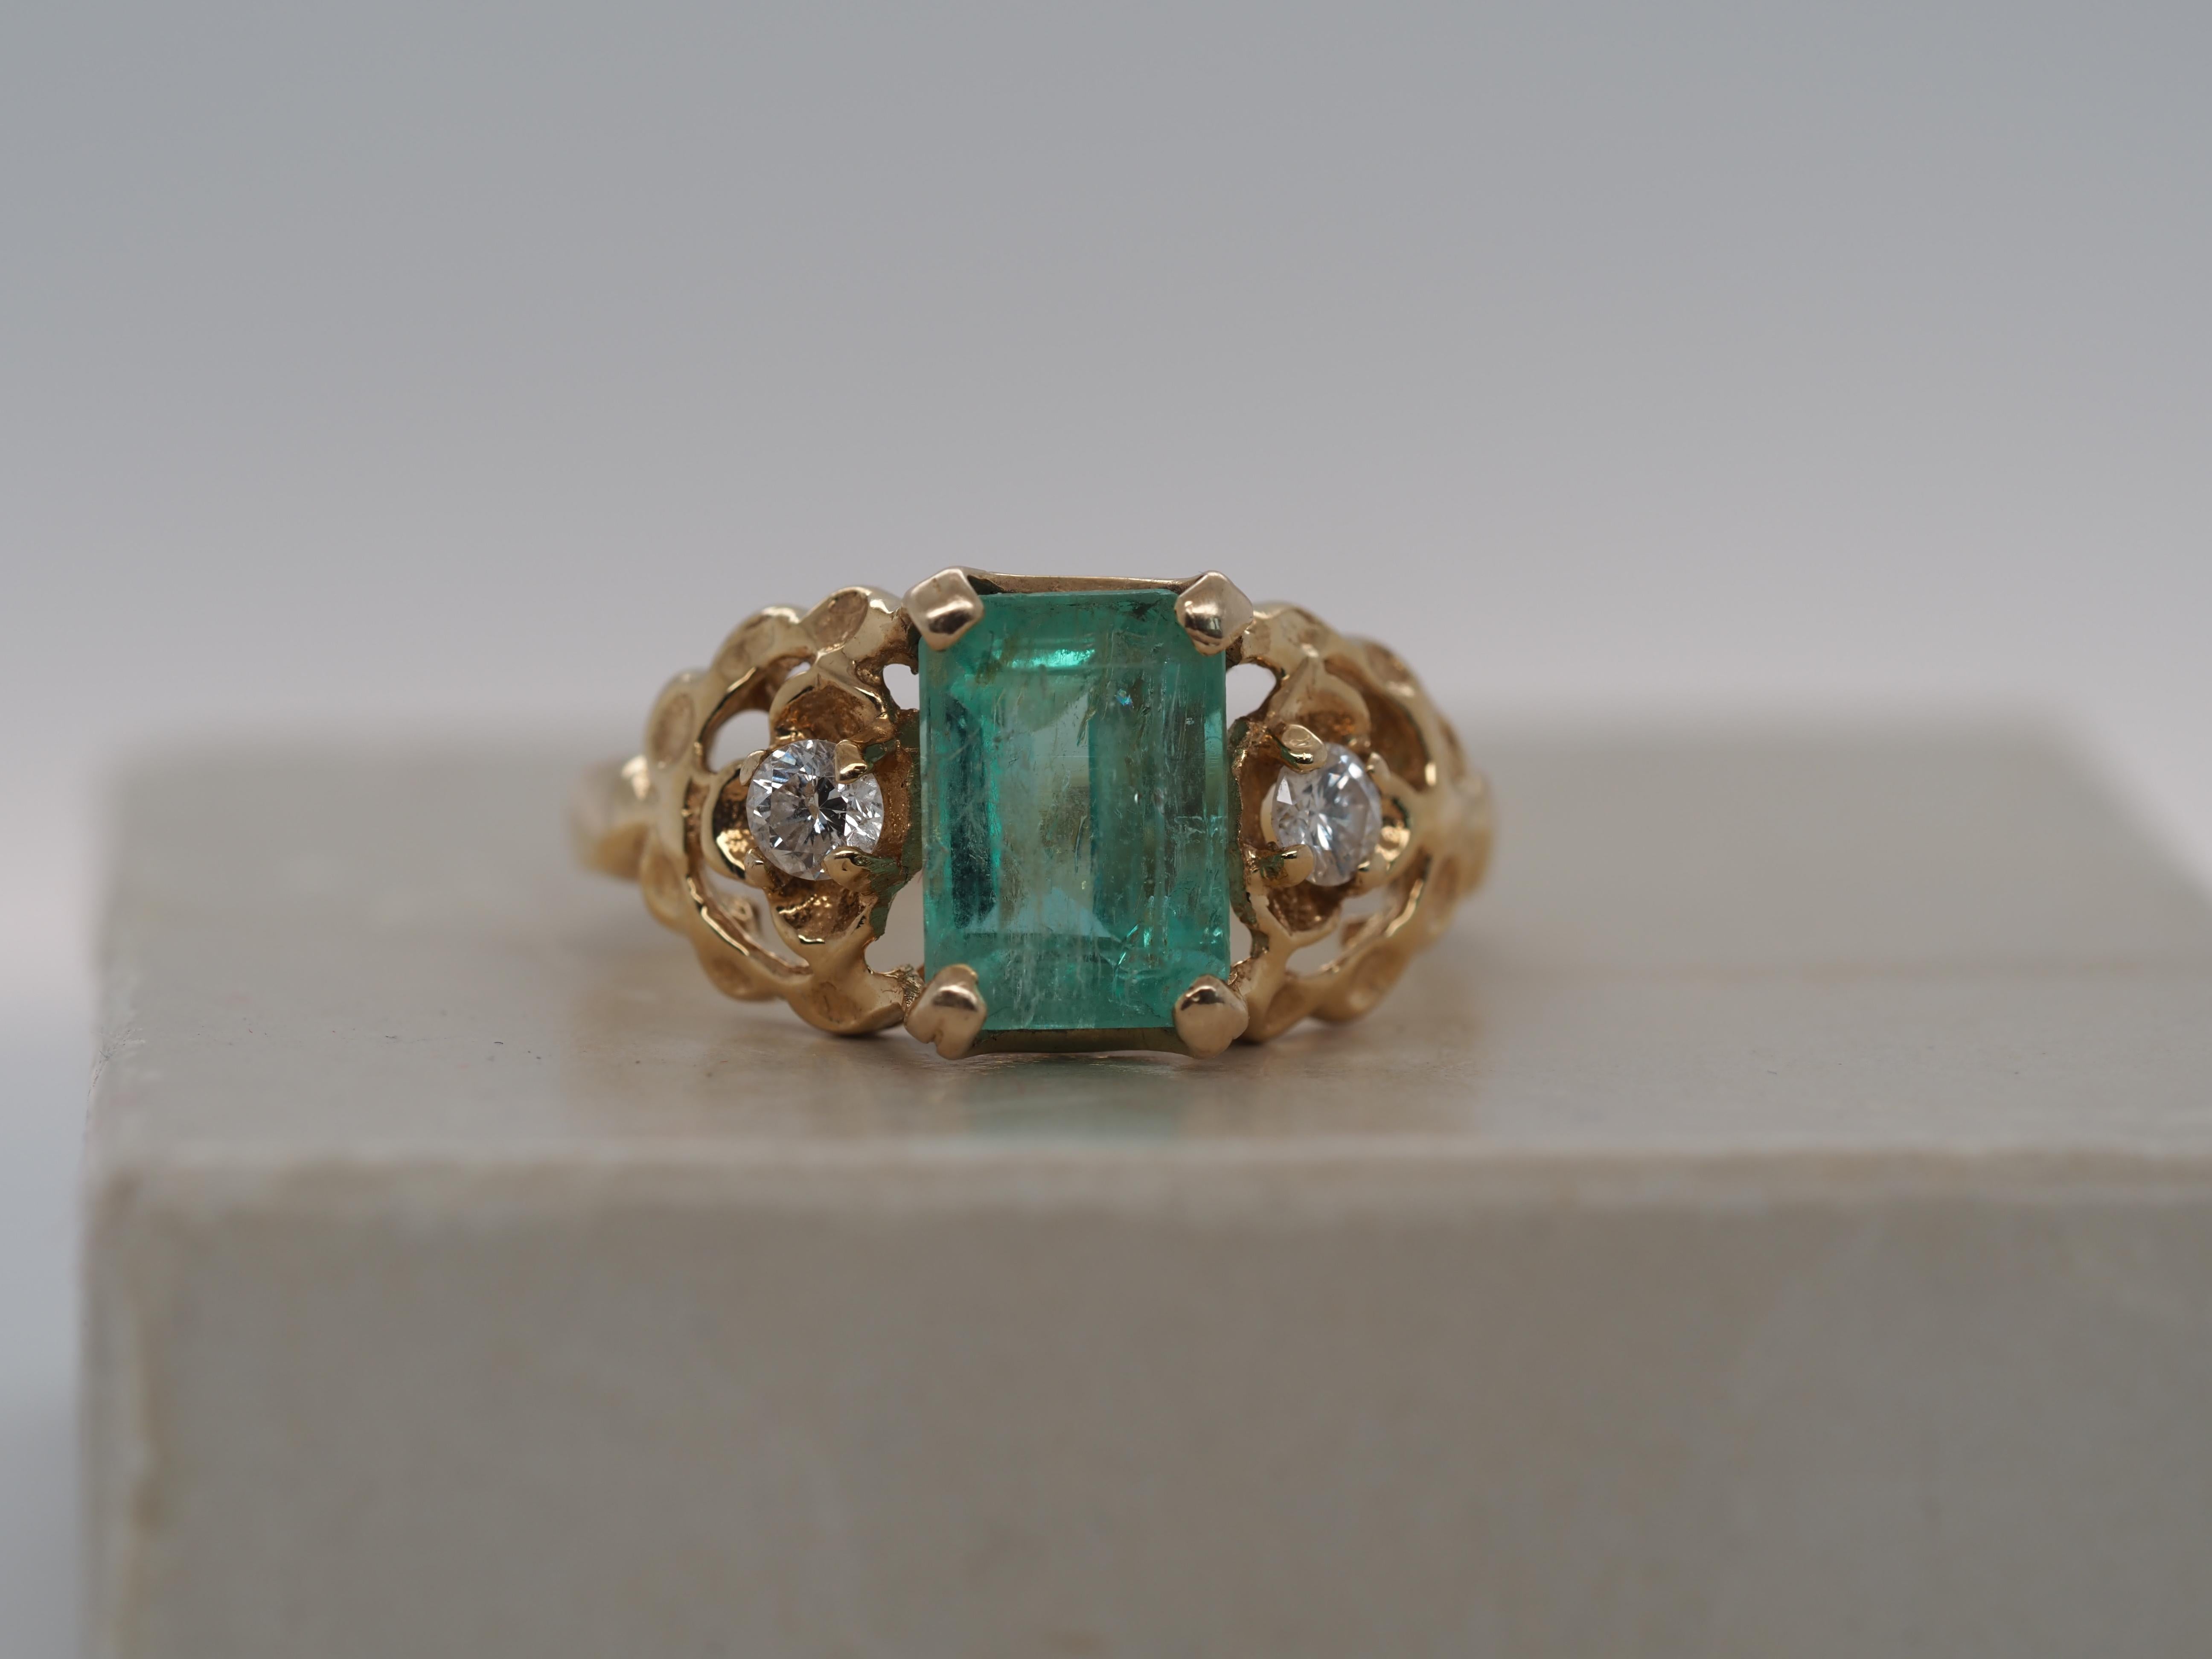 Item Details:
Ring Size: 6
Metal Type: 14k Yellow Gold [Hallmarked, and Tested]
Weight: 3.0 grams
Emerald Details: 2.50ct, Light Green, Natural, Emerald Cut
Diamond Details:
Weight: .12ct, total weight
Cut: Round Brilliant
Clarity: G-H
Color: